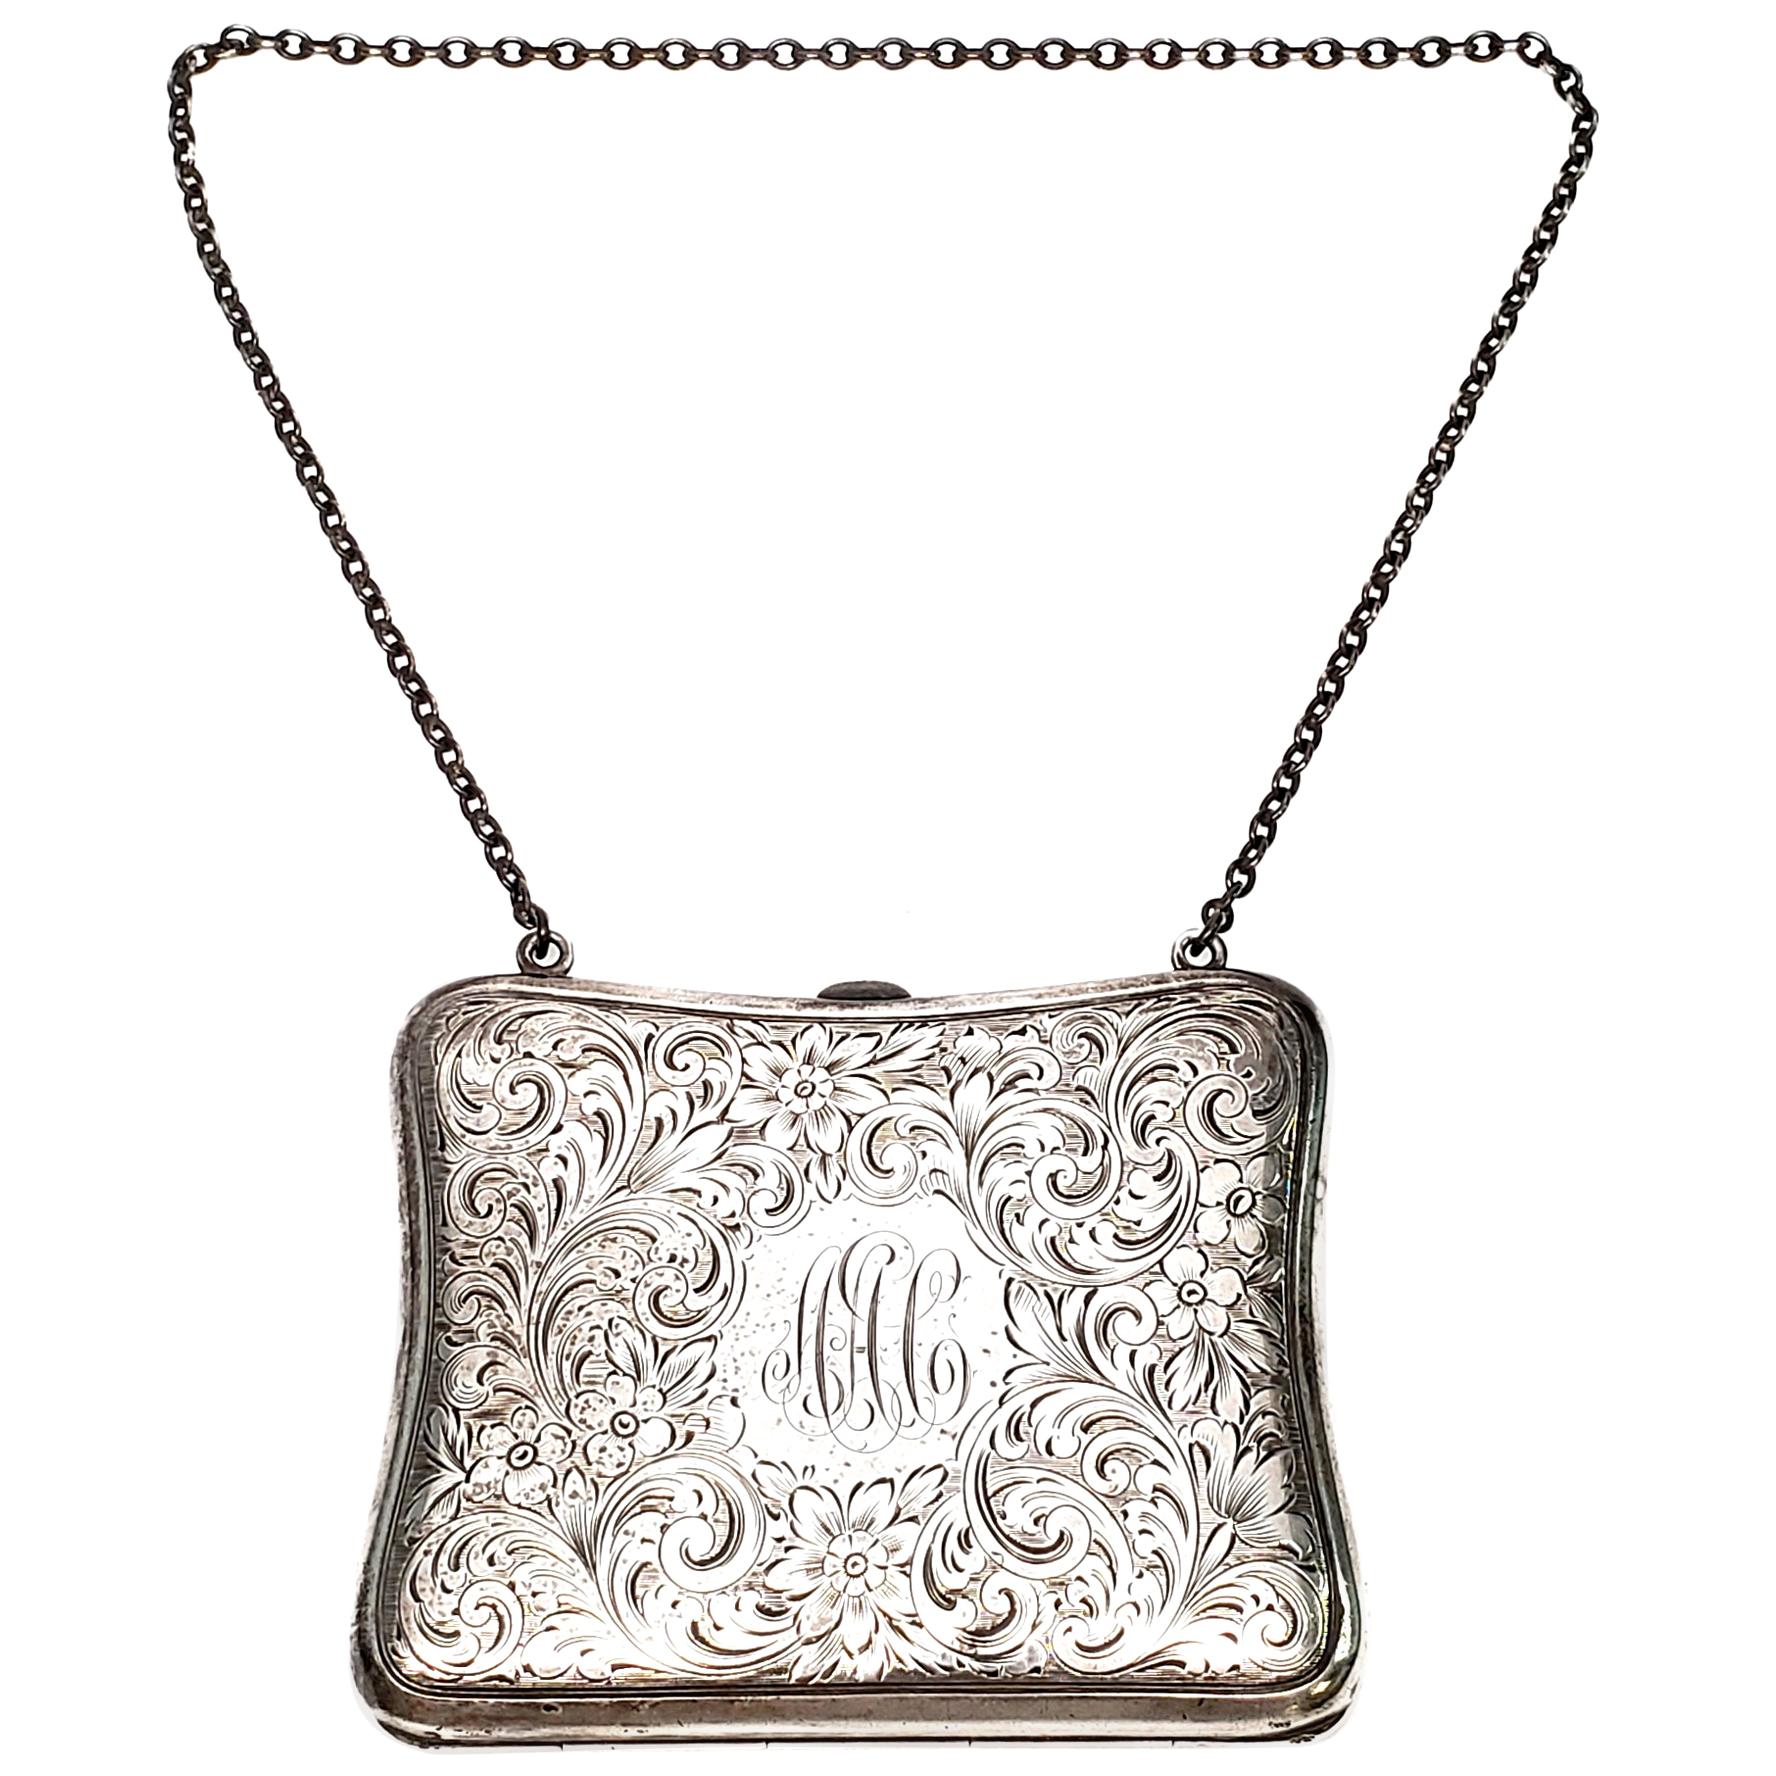 Blankinton Sterling Silver Coin Purse, with Monogram